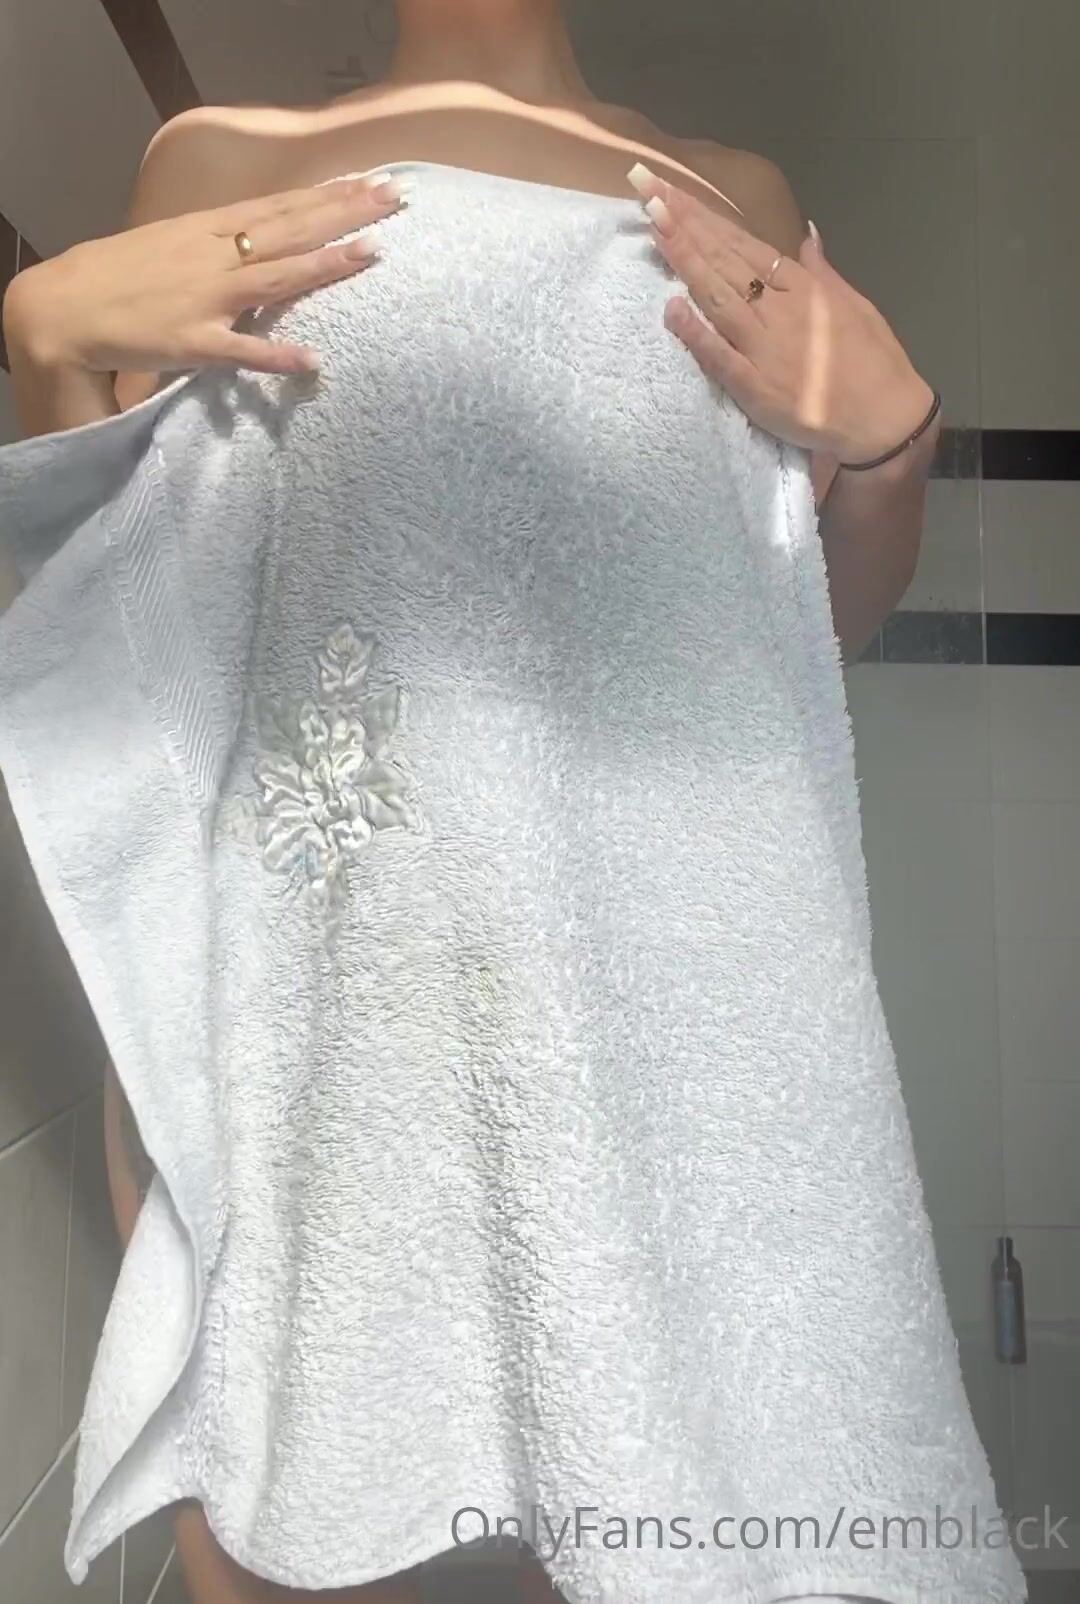 Emily Black Onlyfans teasing with the towel video